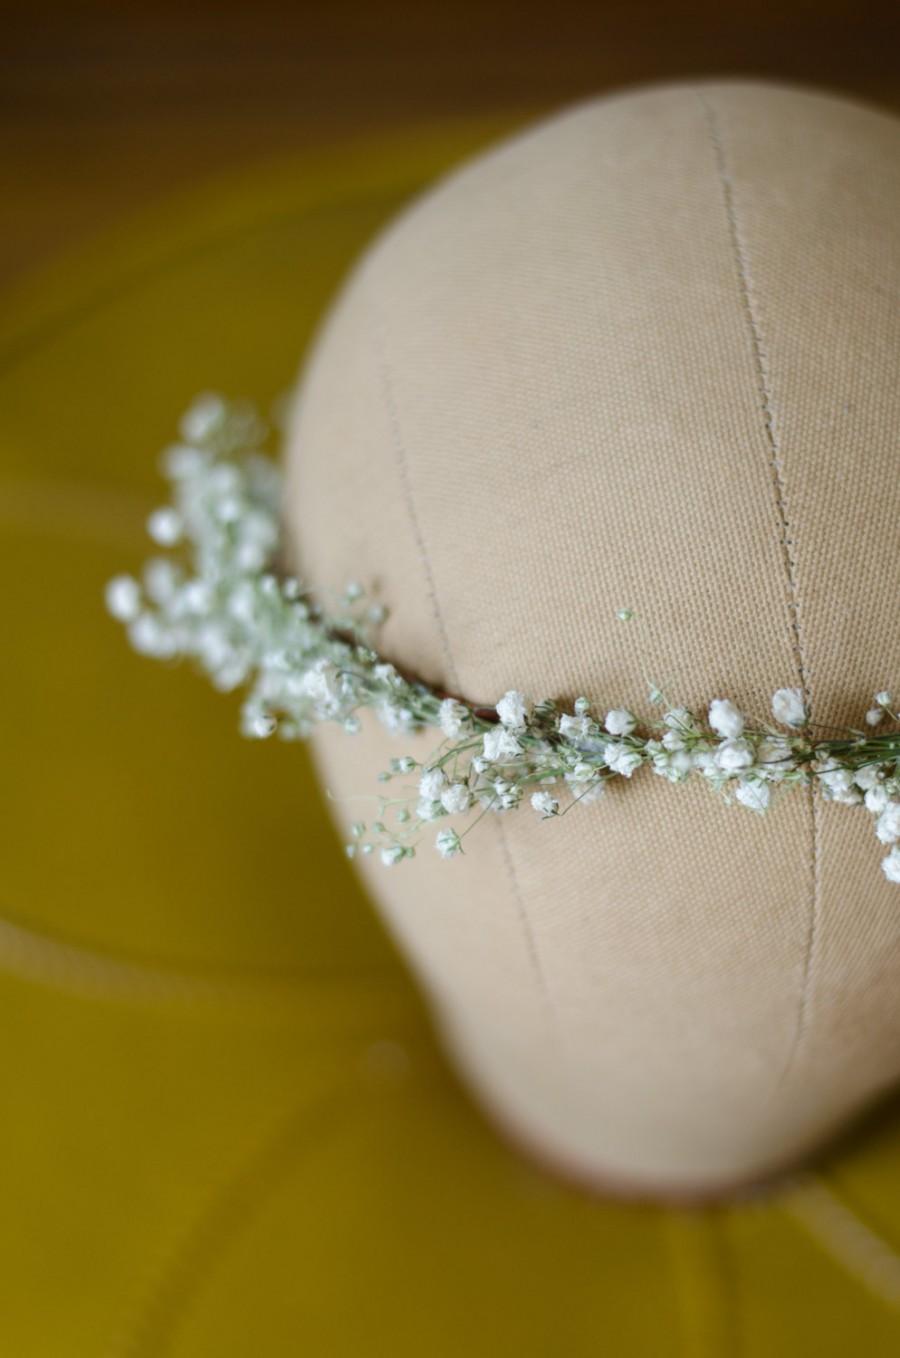 Wedding - Babys Breath Flower Crown / Halo / Hair Wreath with Real Dried Flowers - for Bride Bridal Wedding Party Engagement - THINNER Version